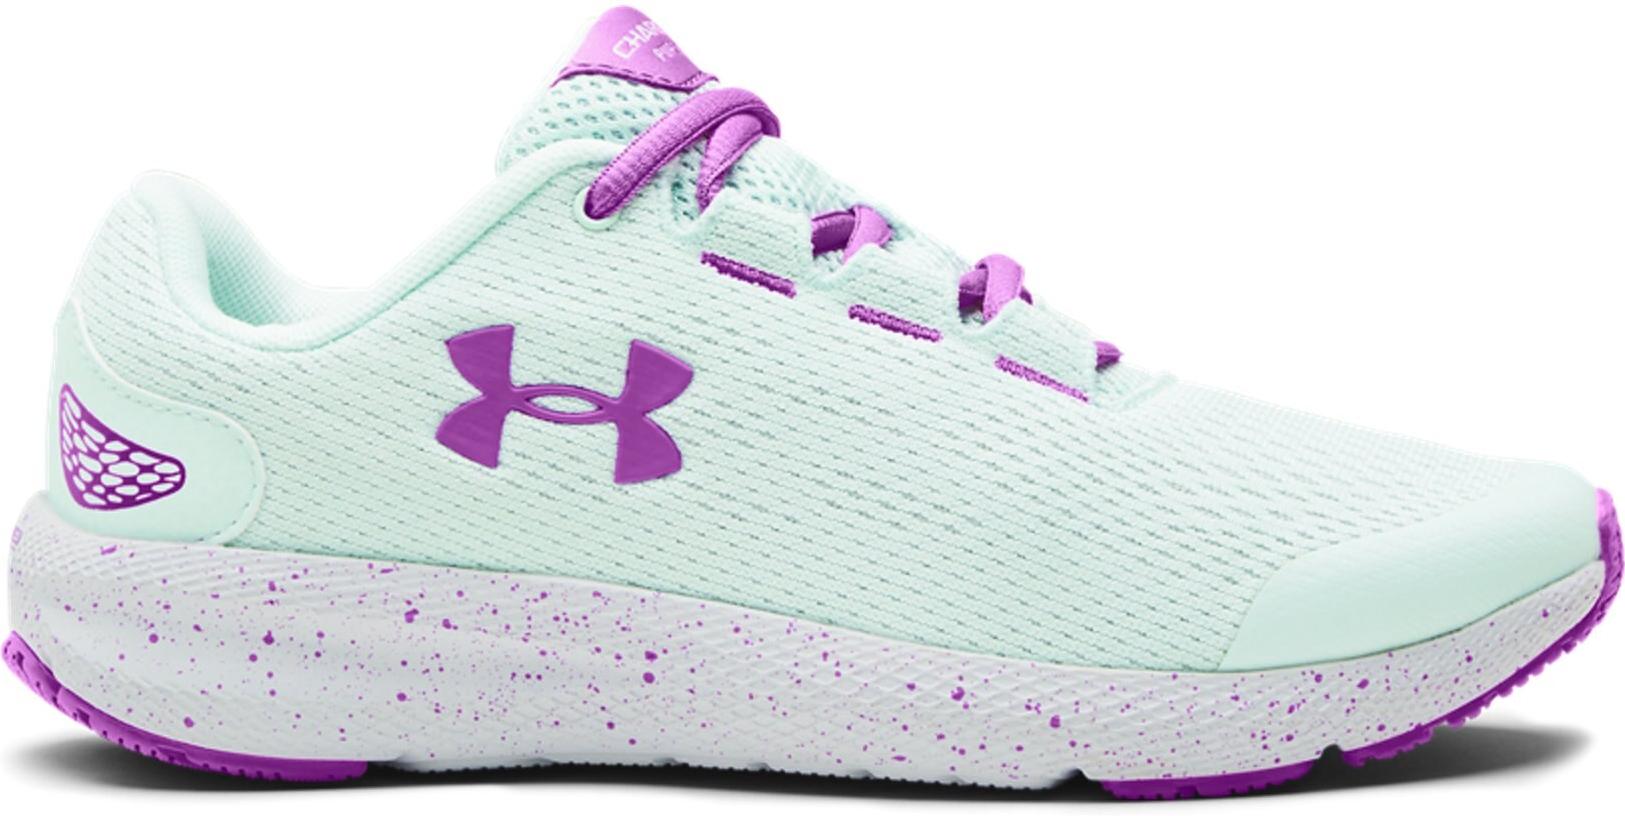 Chaussures de running Under Armour UA GS Charged Pursuit 2